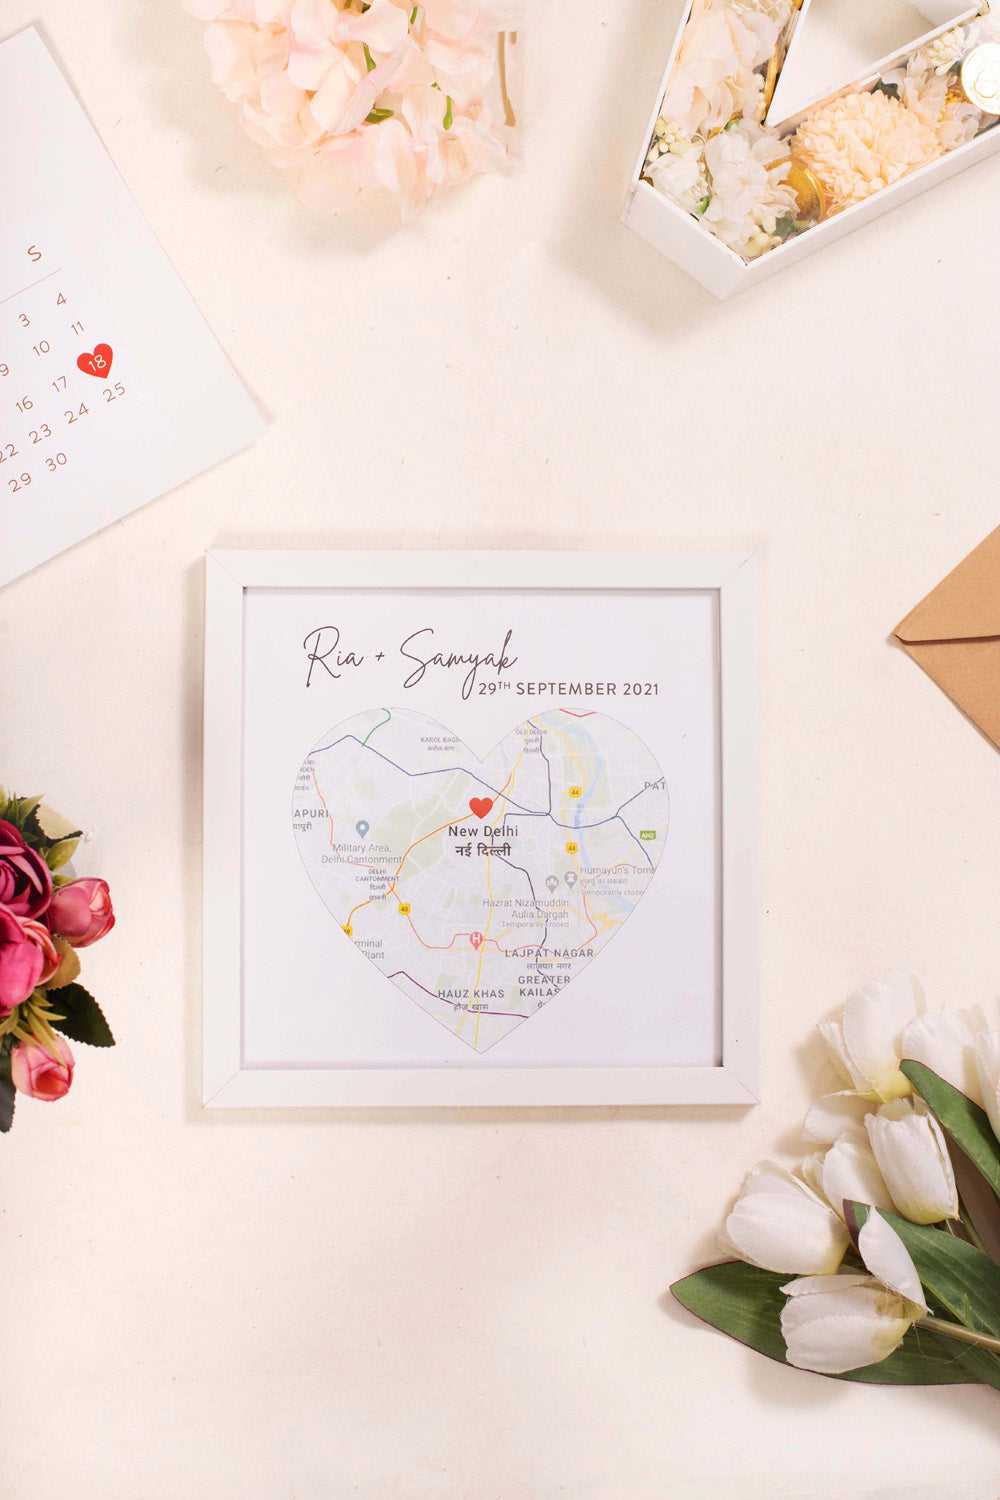 Personalized Location Frame